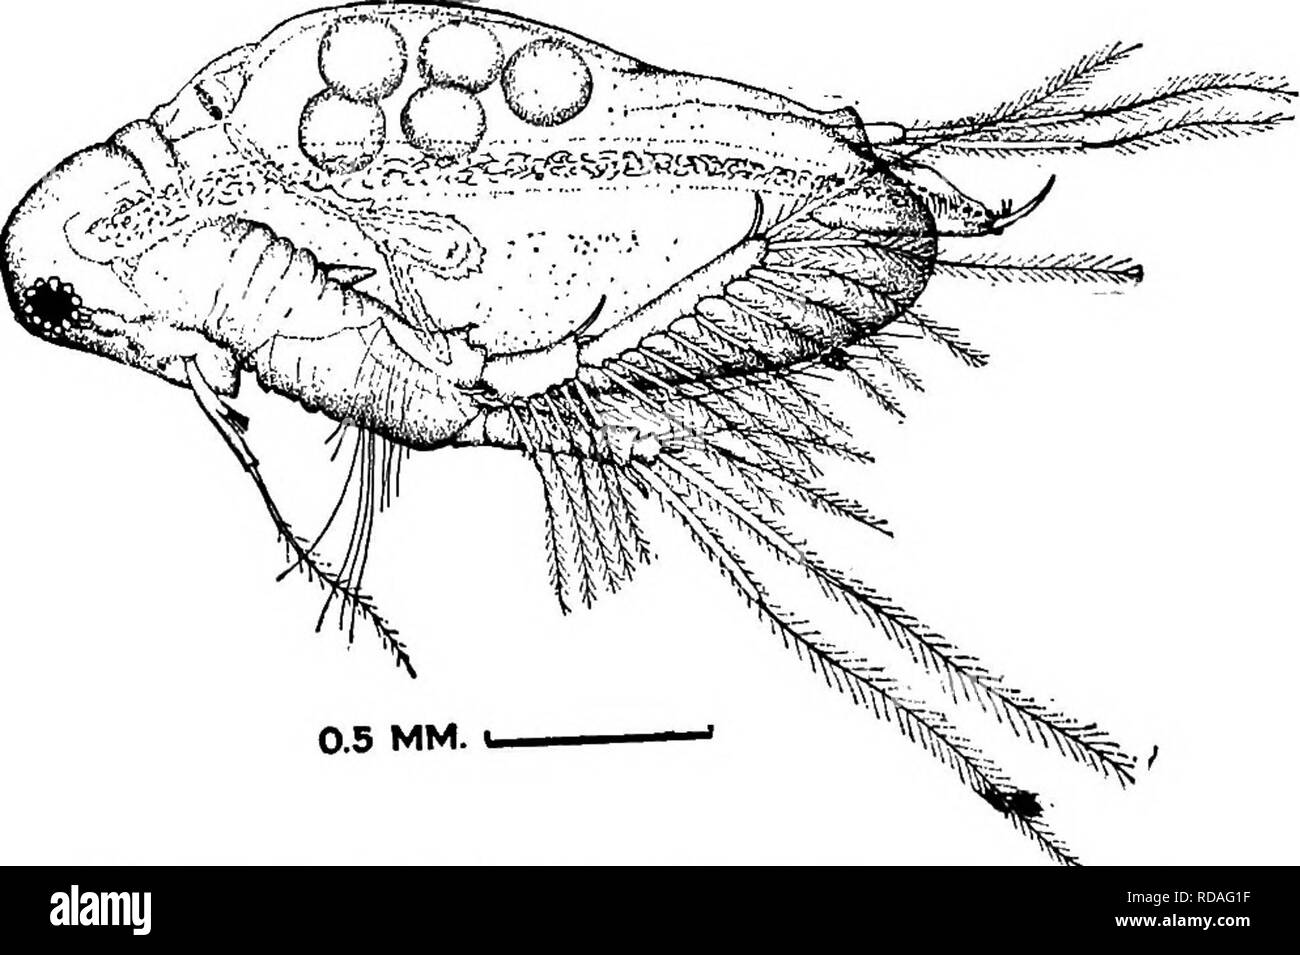 . Fresh-water biology. Freshwater biology. Fig. 1057. a, Lalonopsis fasciculata; b, Latonopds occidentalism Fig. 1058. u, Latonopsis fasciculata; b, Pseudosida bidentata. 17 (14) Eye ventral or in middle of head. Rostrum present. Pseudosida Herrick 1884. Only one American species. . Pseudosida bidentata Herrick 1884. General form like Sida but head more depressed and dorsum more arched. Rostrum present; no fornix or cervical glands. Antennules attached as in Sida, long basal part with olfactory setae on side, and long flexible flagellum. Dorsal ramus of antennae with 2, ventral with 3, joints; Stock Photo